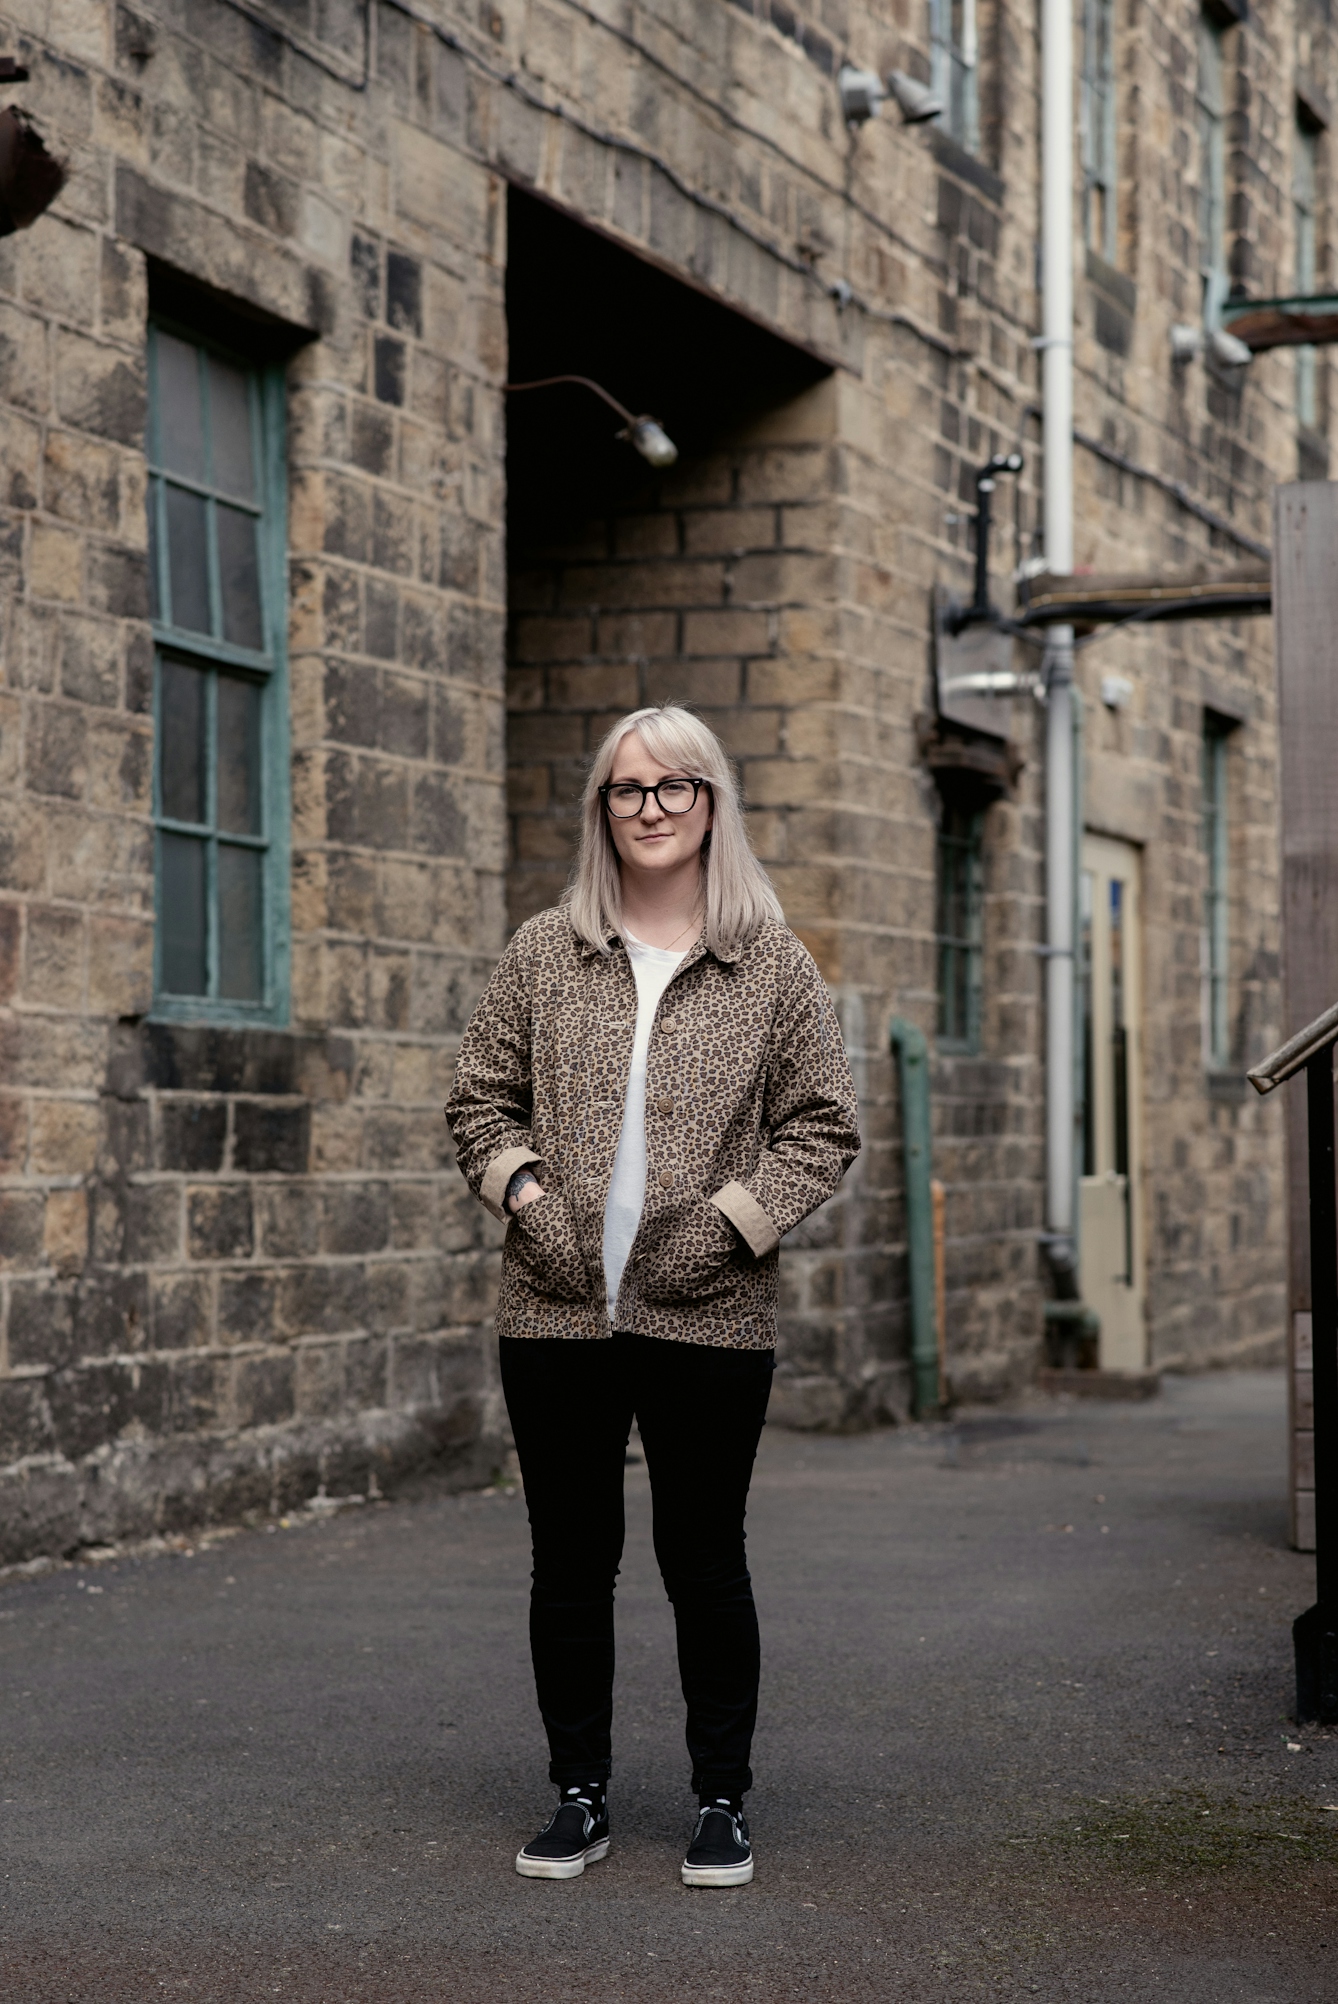 Photograph of a young woman with shoulder length blond hair and glasses in full length. She is standing in an industrial back-street location, wearing a white t-shirt, a leopard skin patterned jacket and black leggings. Her hands are in her jacket pockets and she is looking to camera with a slight smile. Behind her in the background is a large brick building with windows and doorways and external pipework and cables.